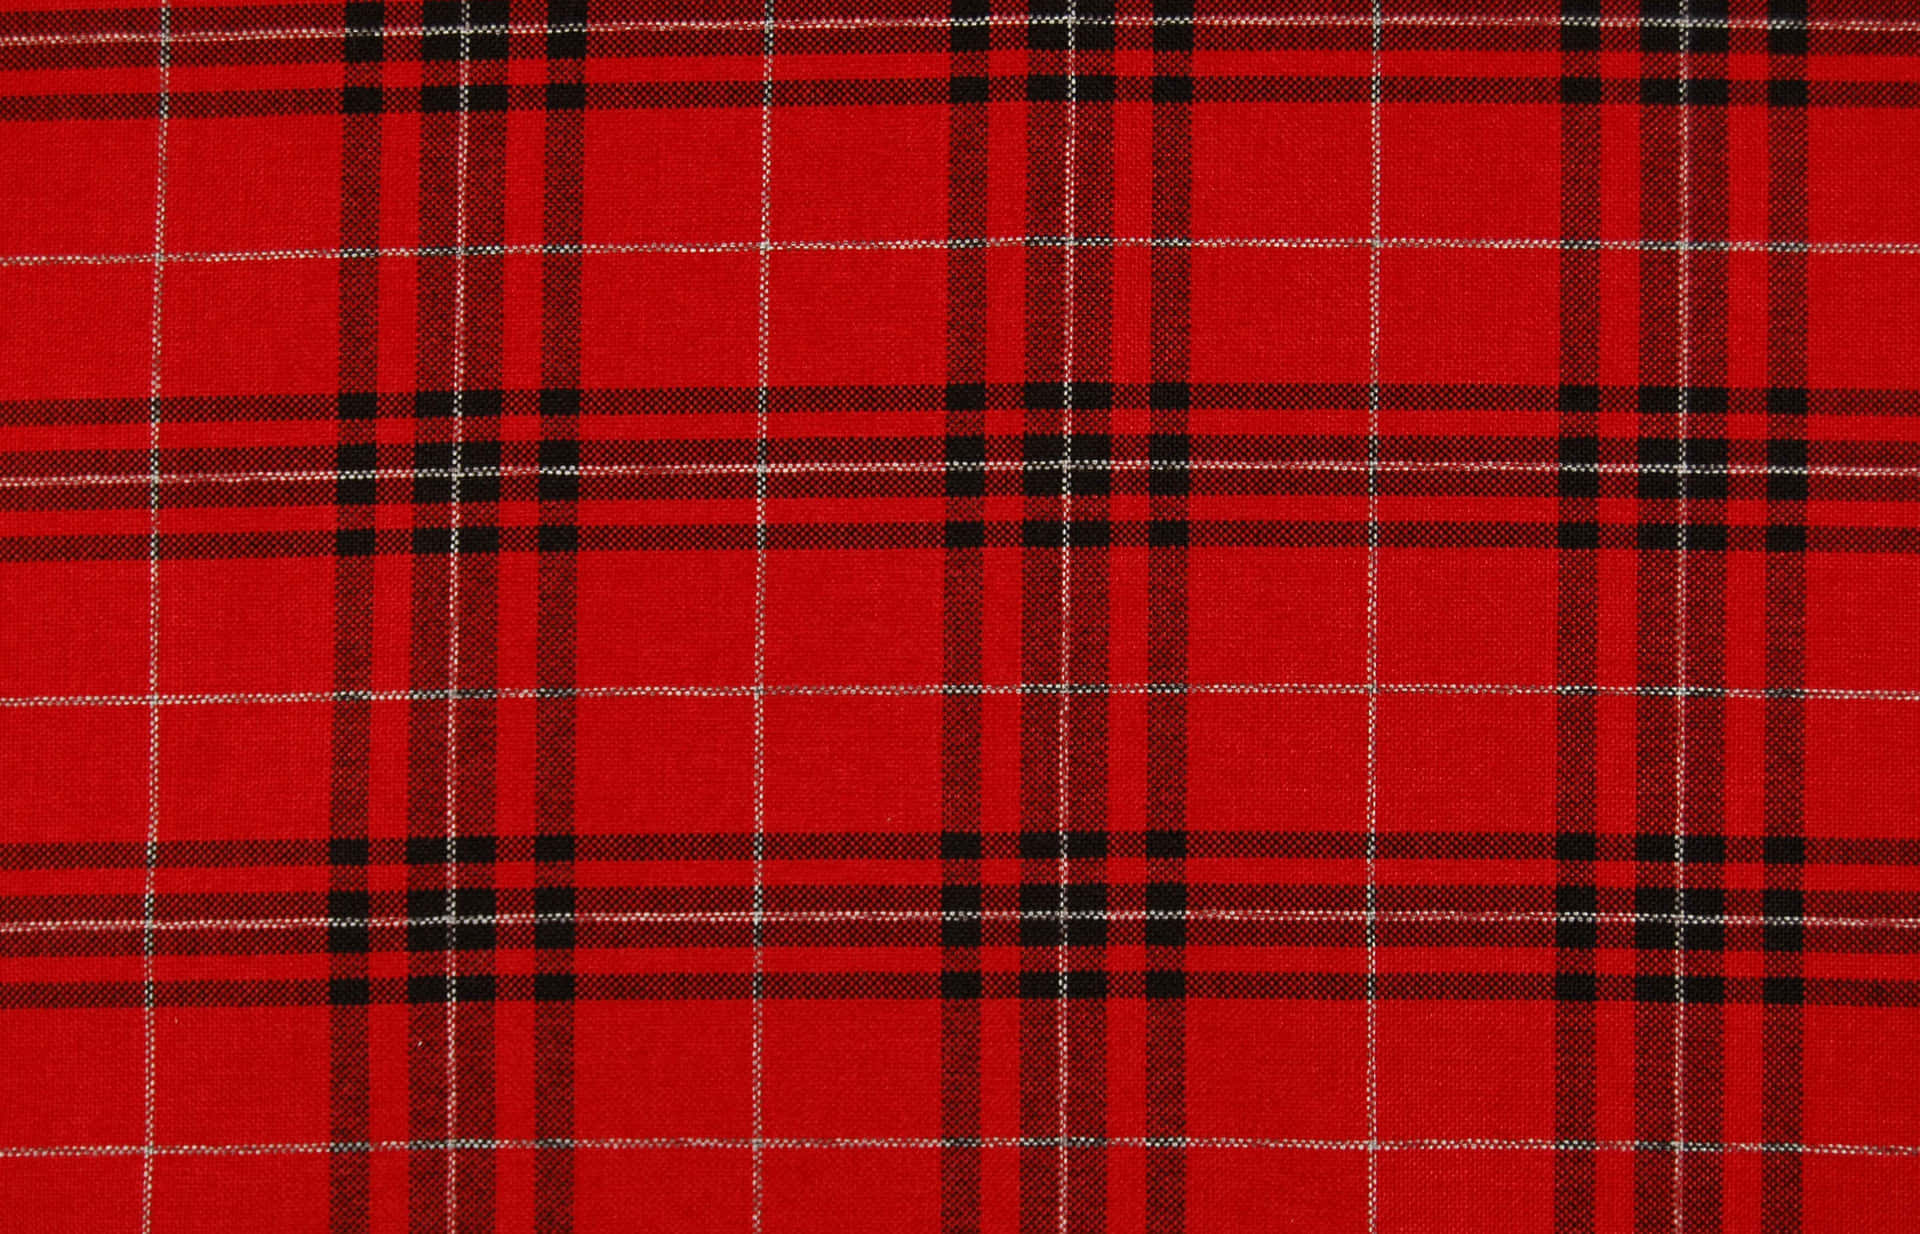 Two-Toned Geometric Pattern of Red and Black Plaid Wallpaper